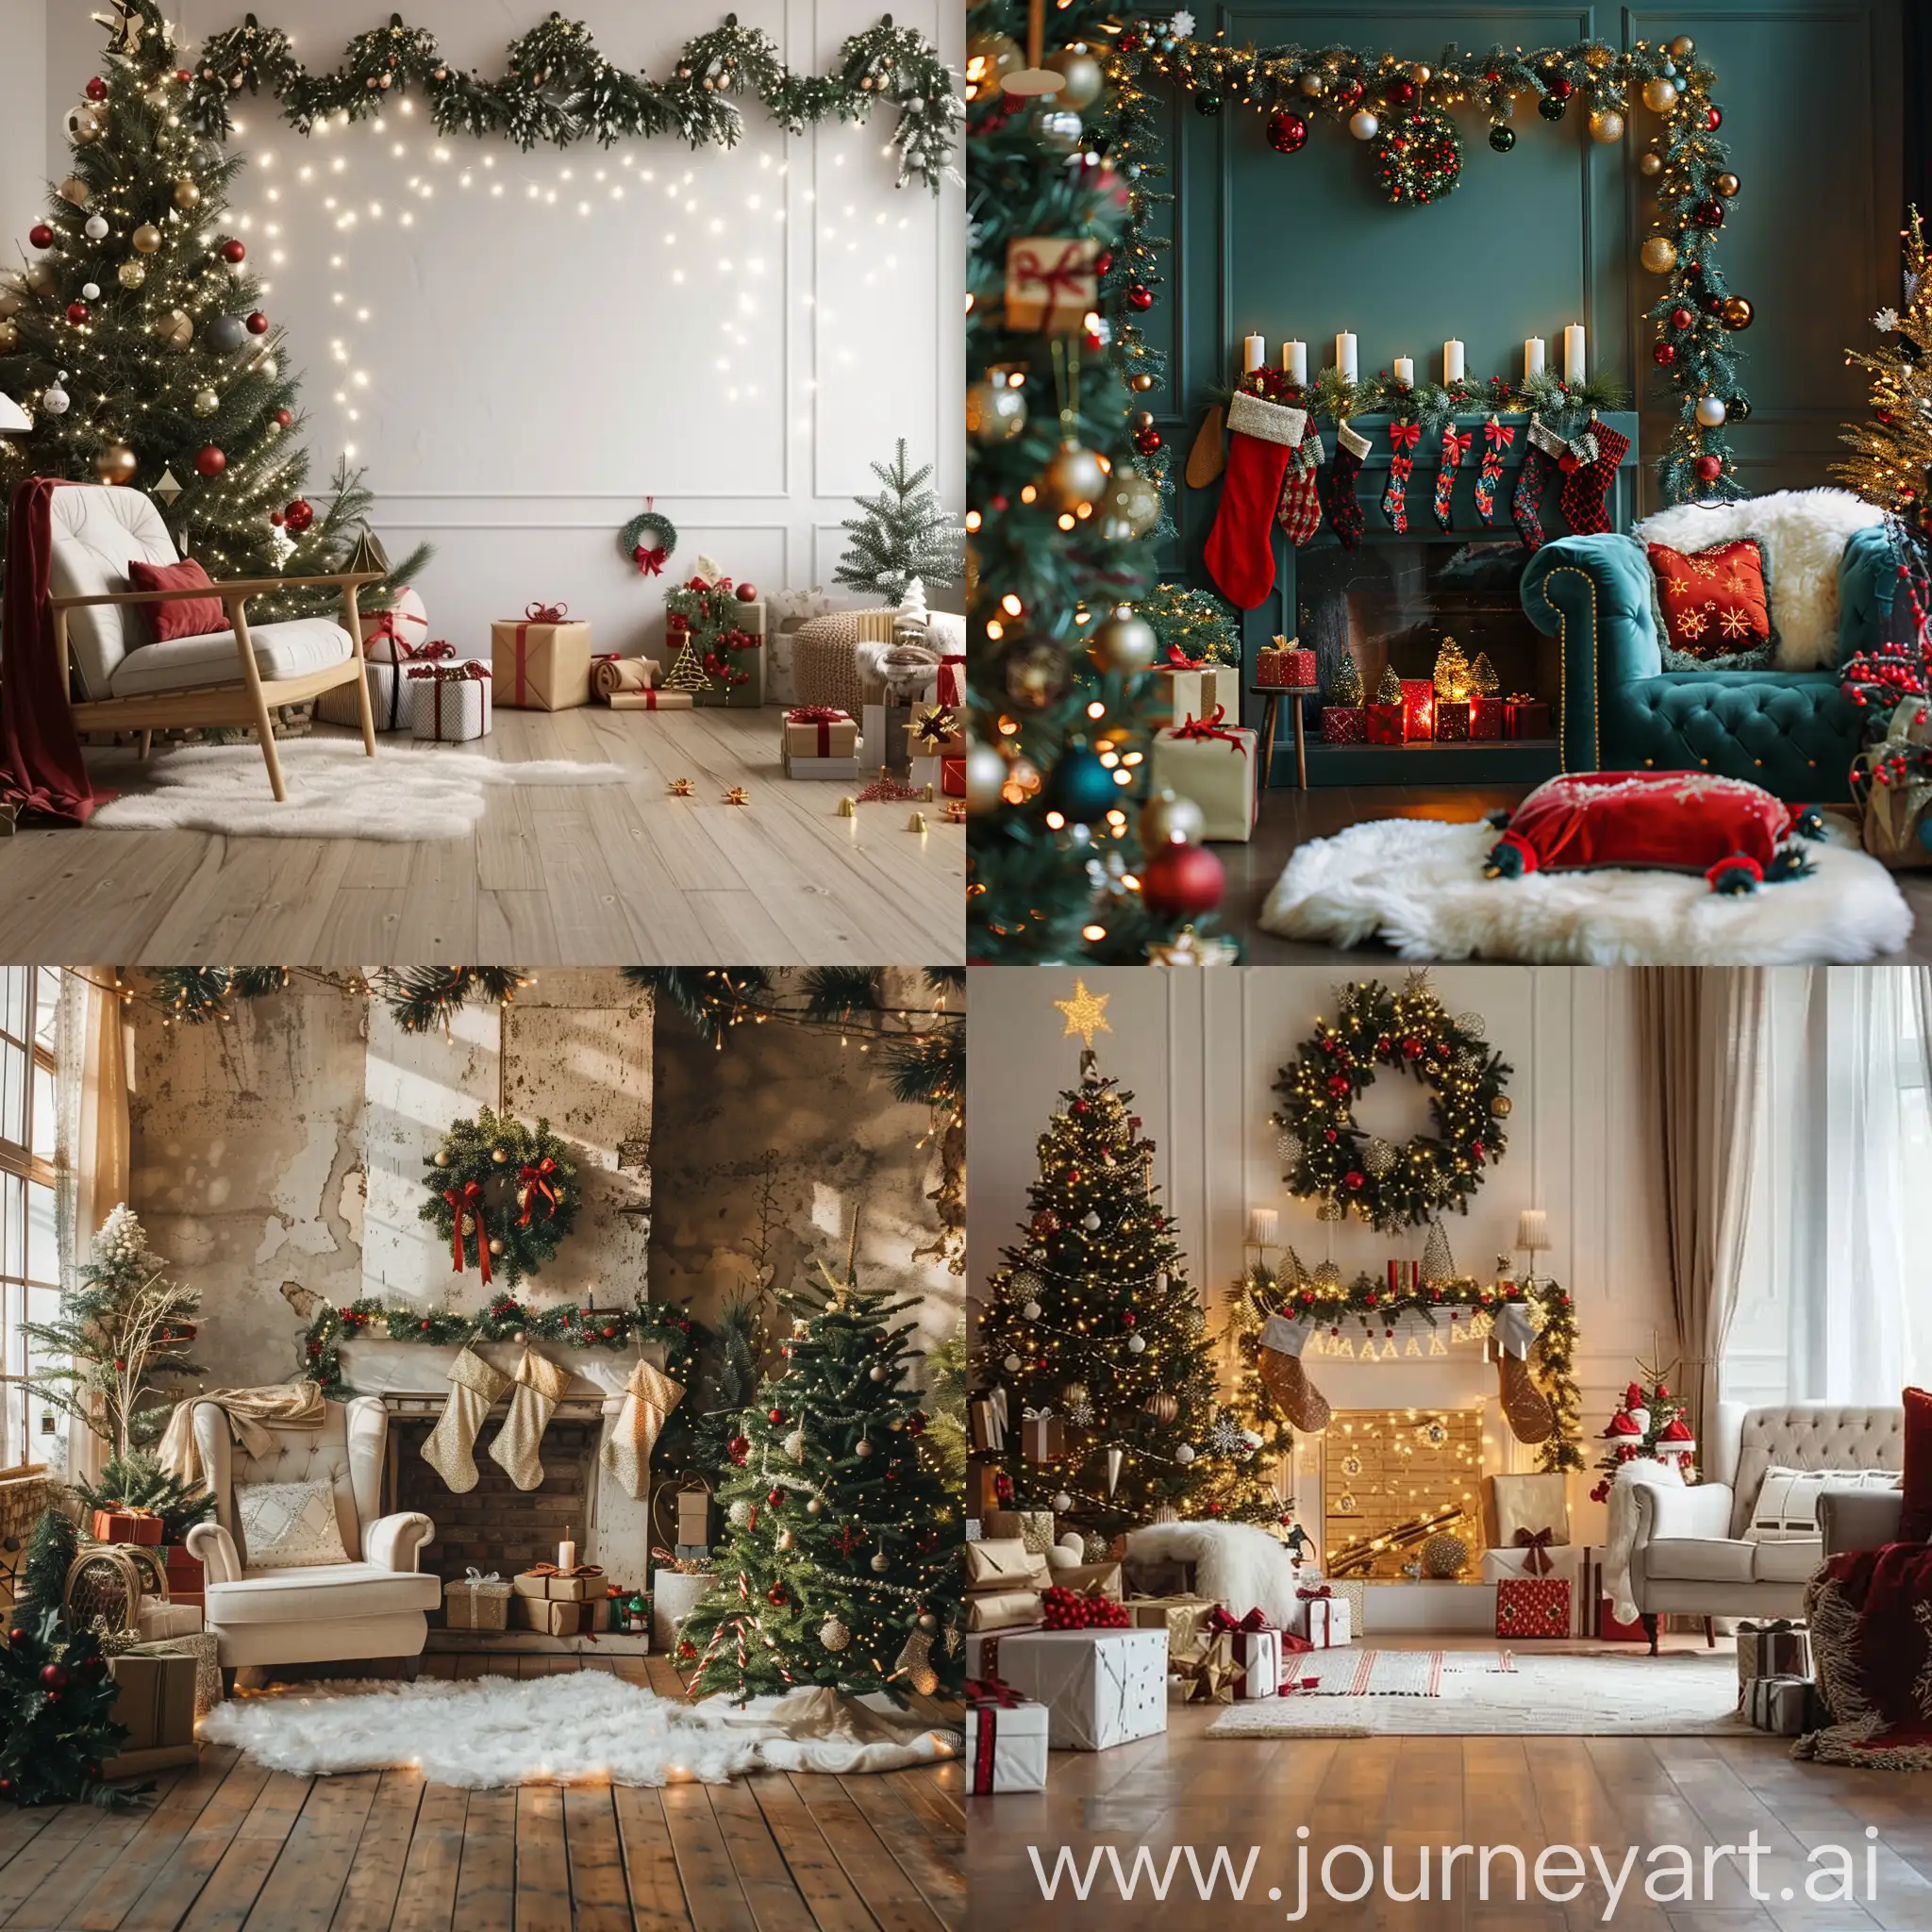 Festive-Christmas-Room-Decorated-with-Ornaments